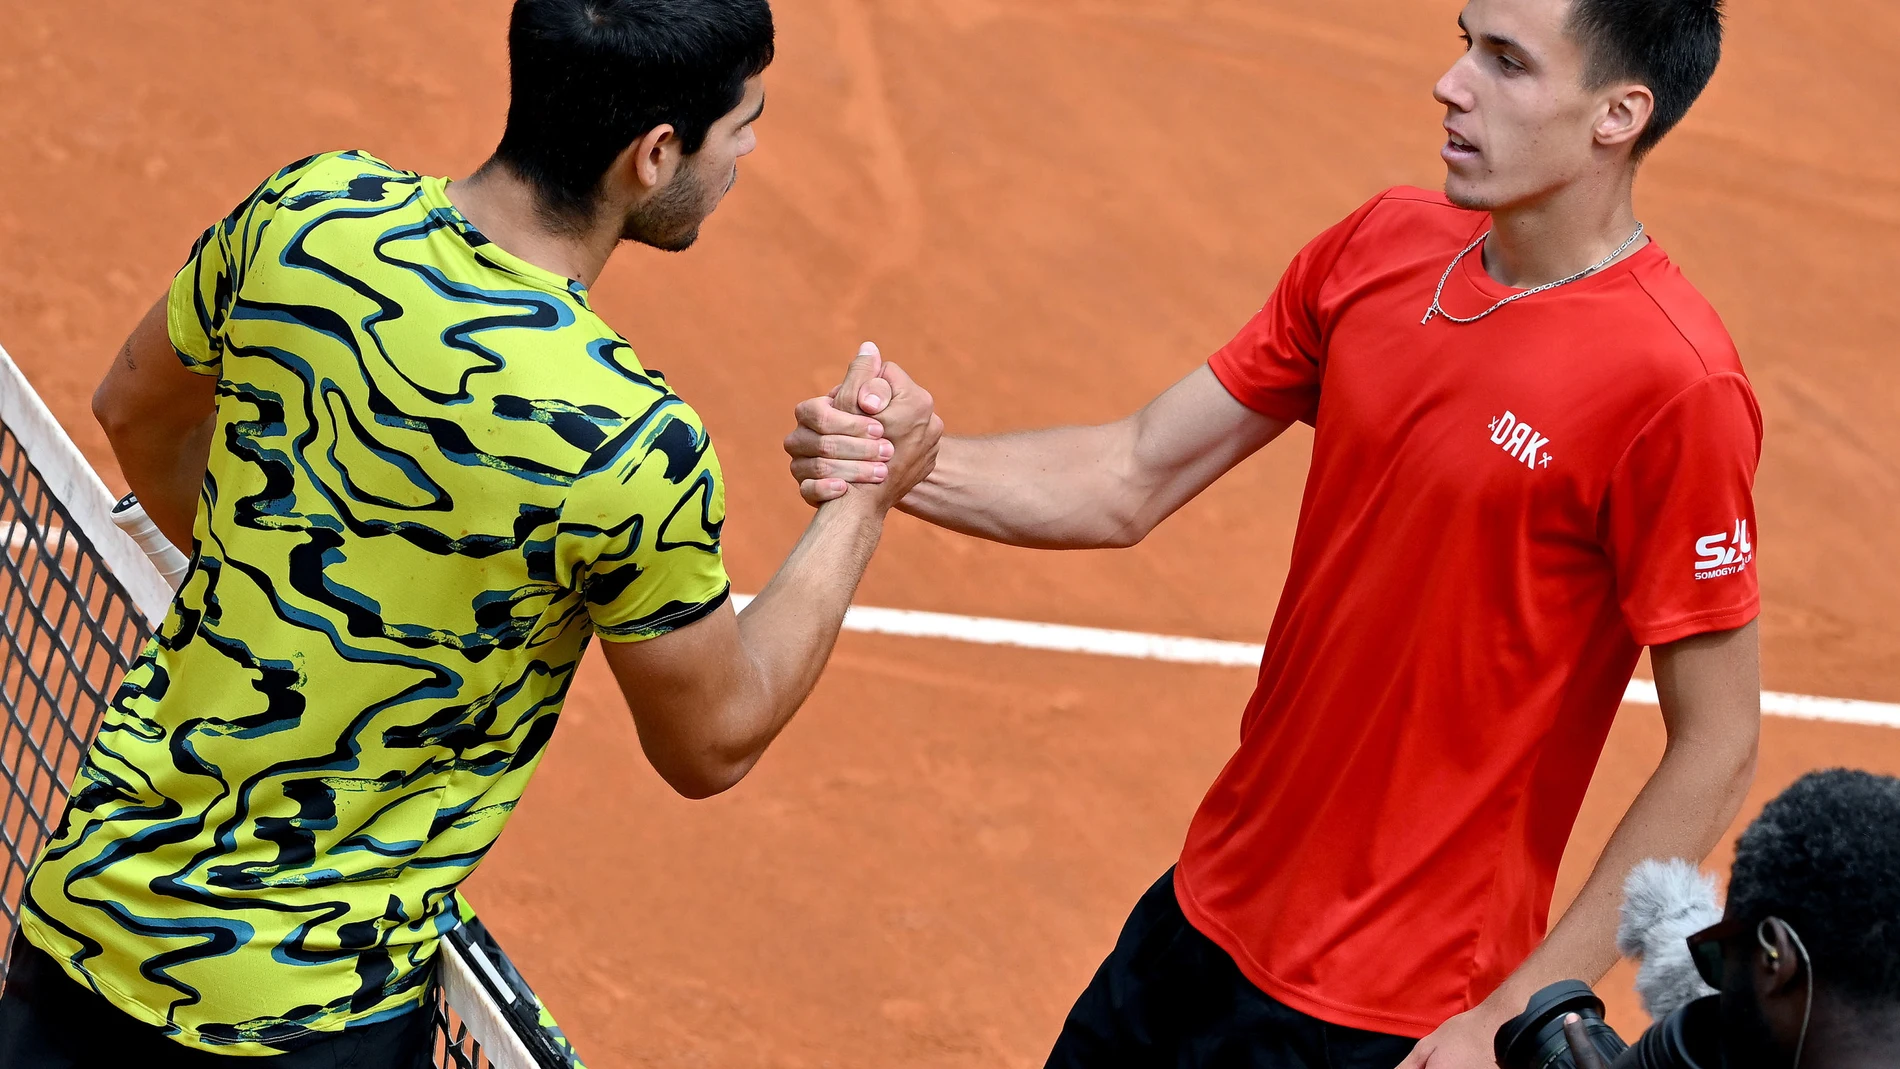 Rome (Italy), 15/05/2023.- Fabian Marozsan (R) of Hungary is congratulated by Carlos Alcaraz of Spain after winning their men's singles third round match at the Italian Open tennis tournament in Rome, Italy, 15 May 2023. (Tenis, Hungría, Italia, España, Roma) EFE/EPA/ETTORE FERRARI 